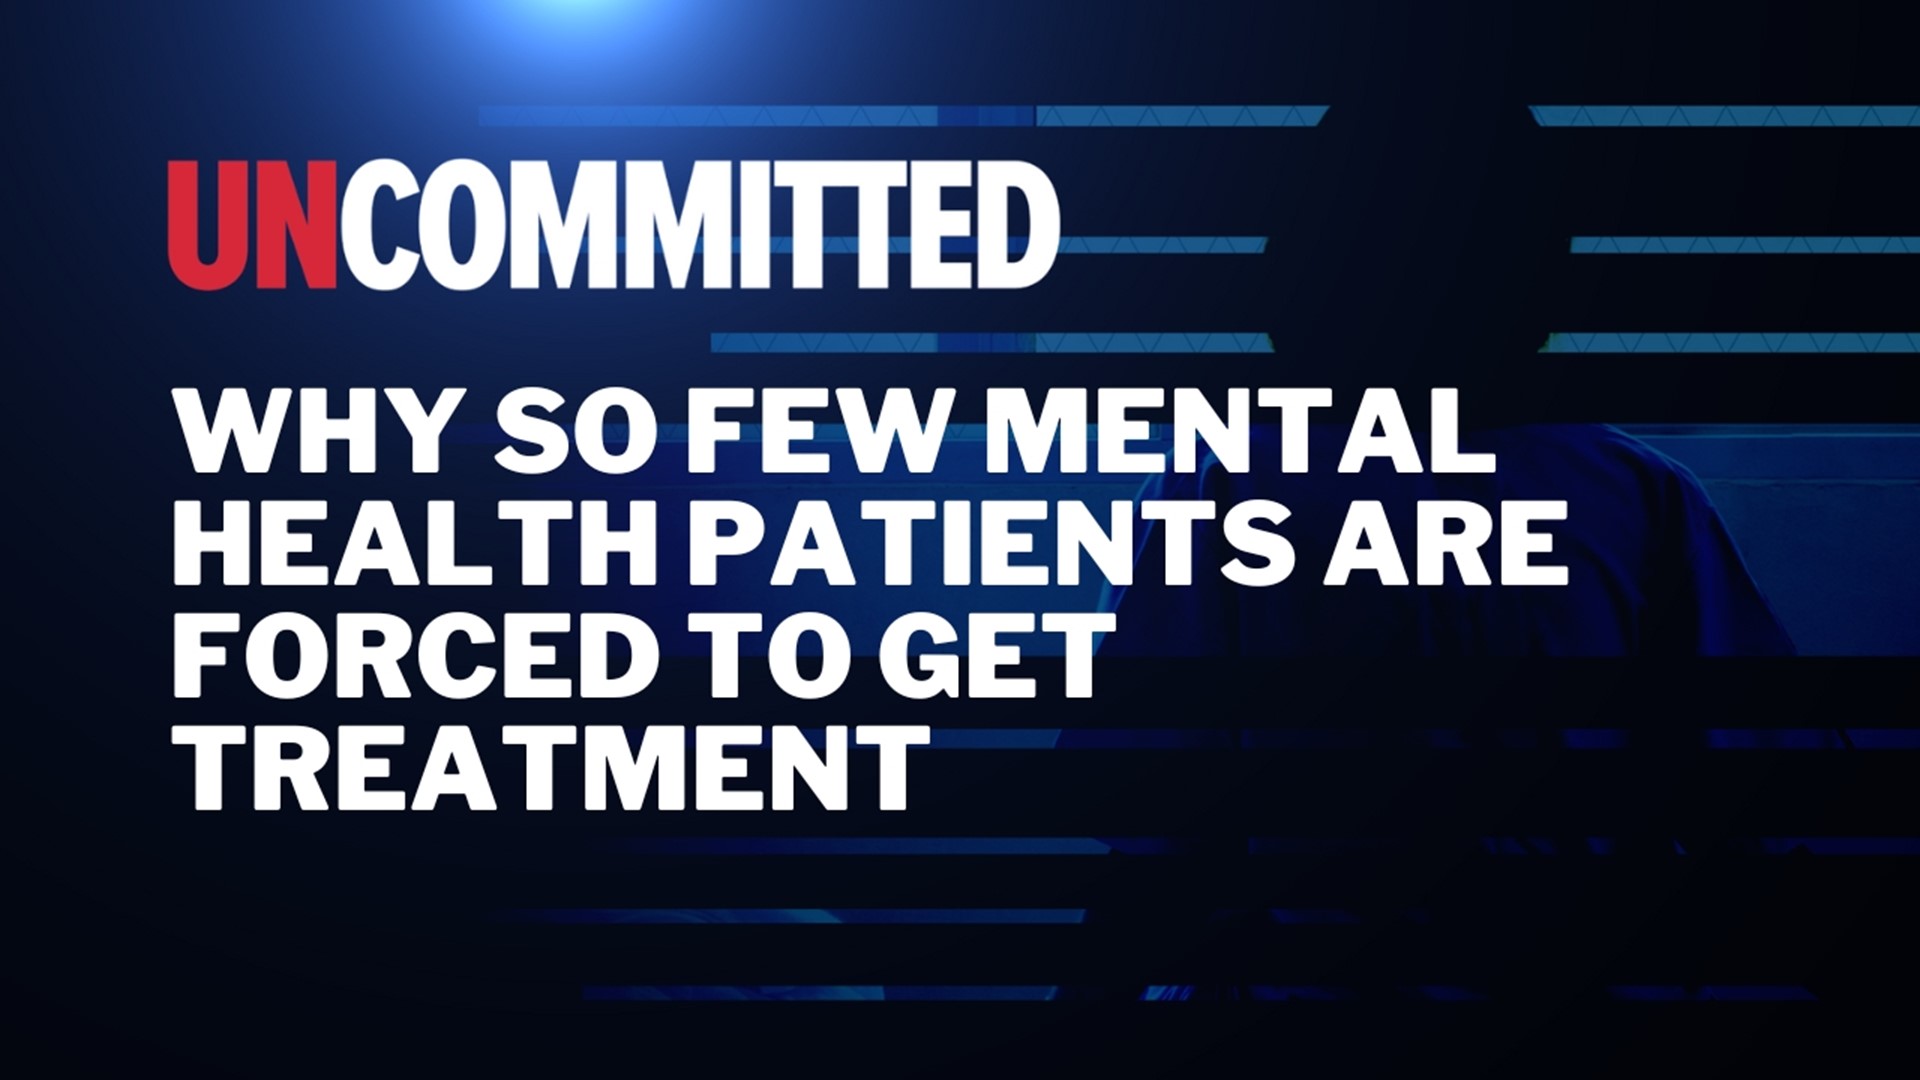 In the third part of KGW's "Uncommitted" series, we explain why so few mental health patients are involuntarily committed even when it's heavily recommended.